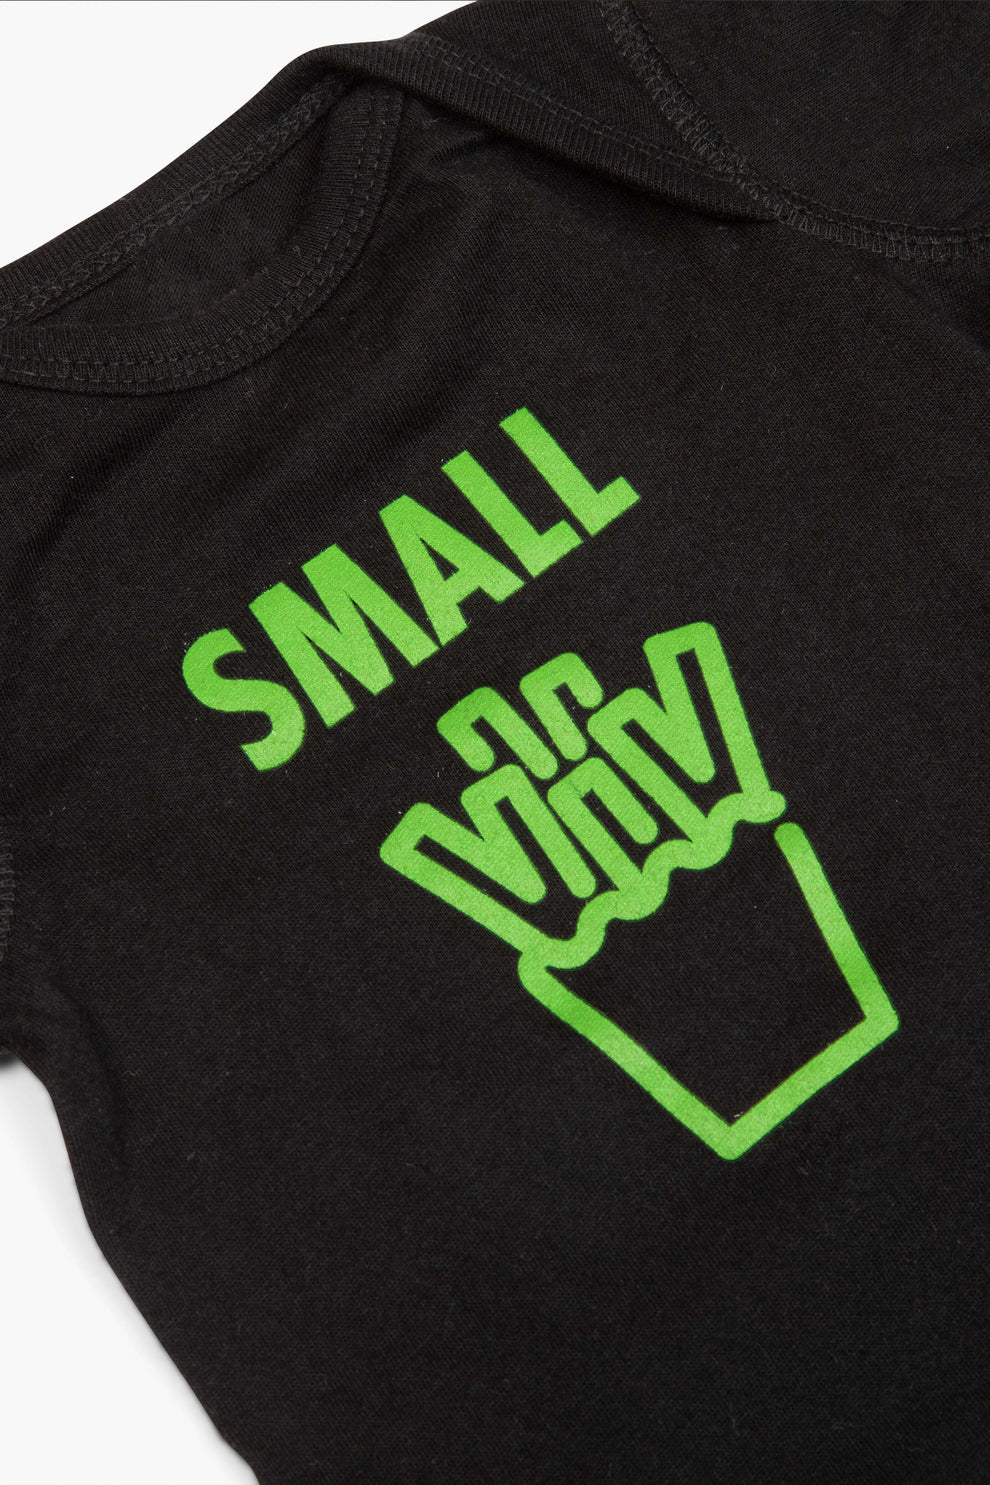 Closeup image of a black onesie with the word "Small" and a graphic of french fries below it